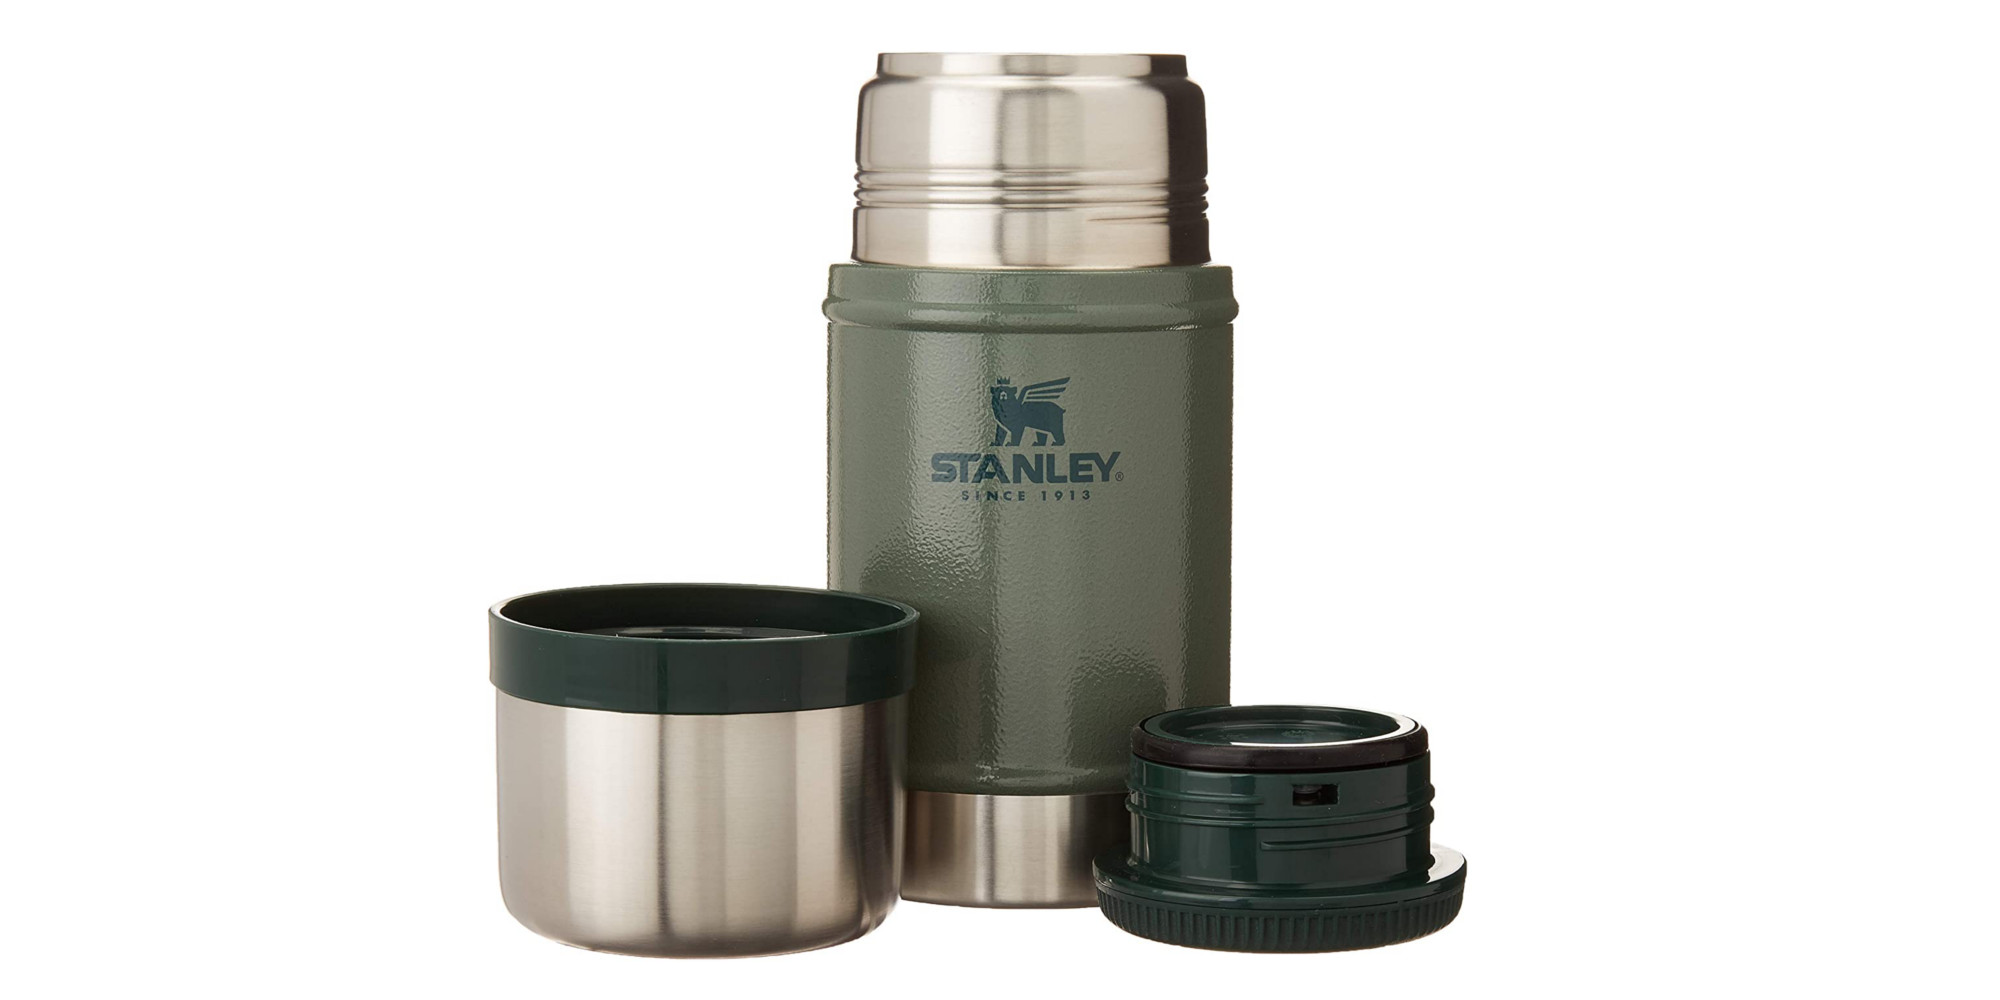 https://9to5toys.com/wp-content/uploads/sites/5/2020/04/Stanley-Legendary-Classic-Vacuum-Insulated-Food-Jar.jpg